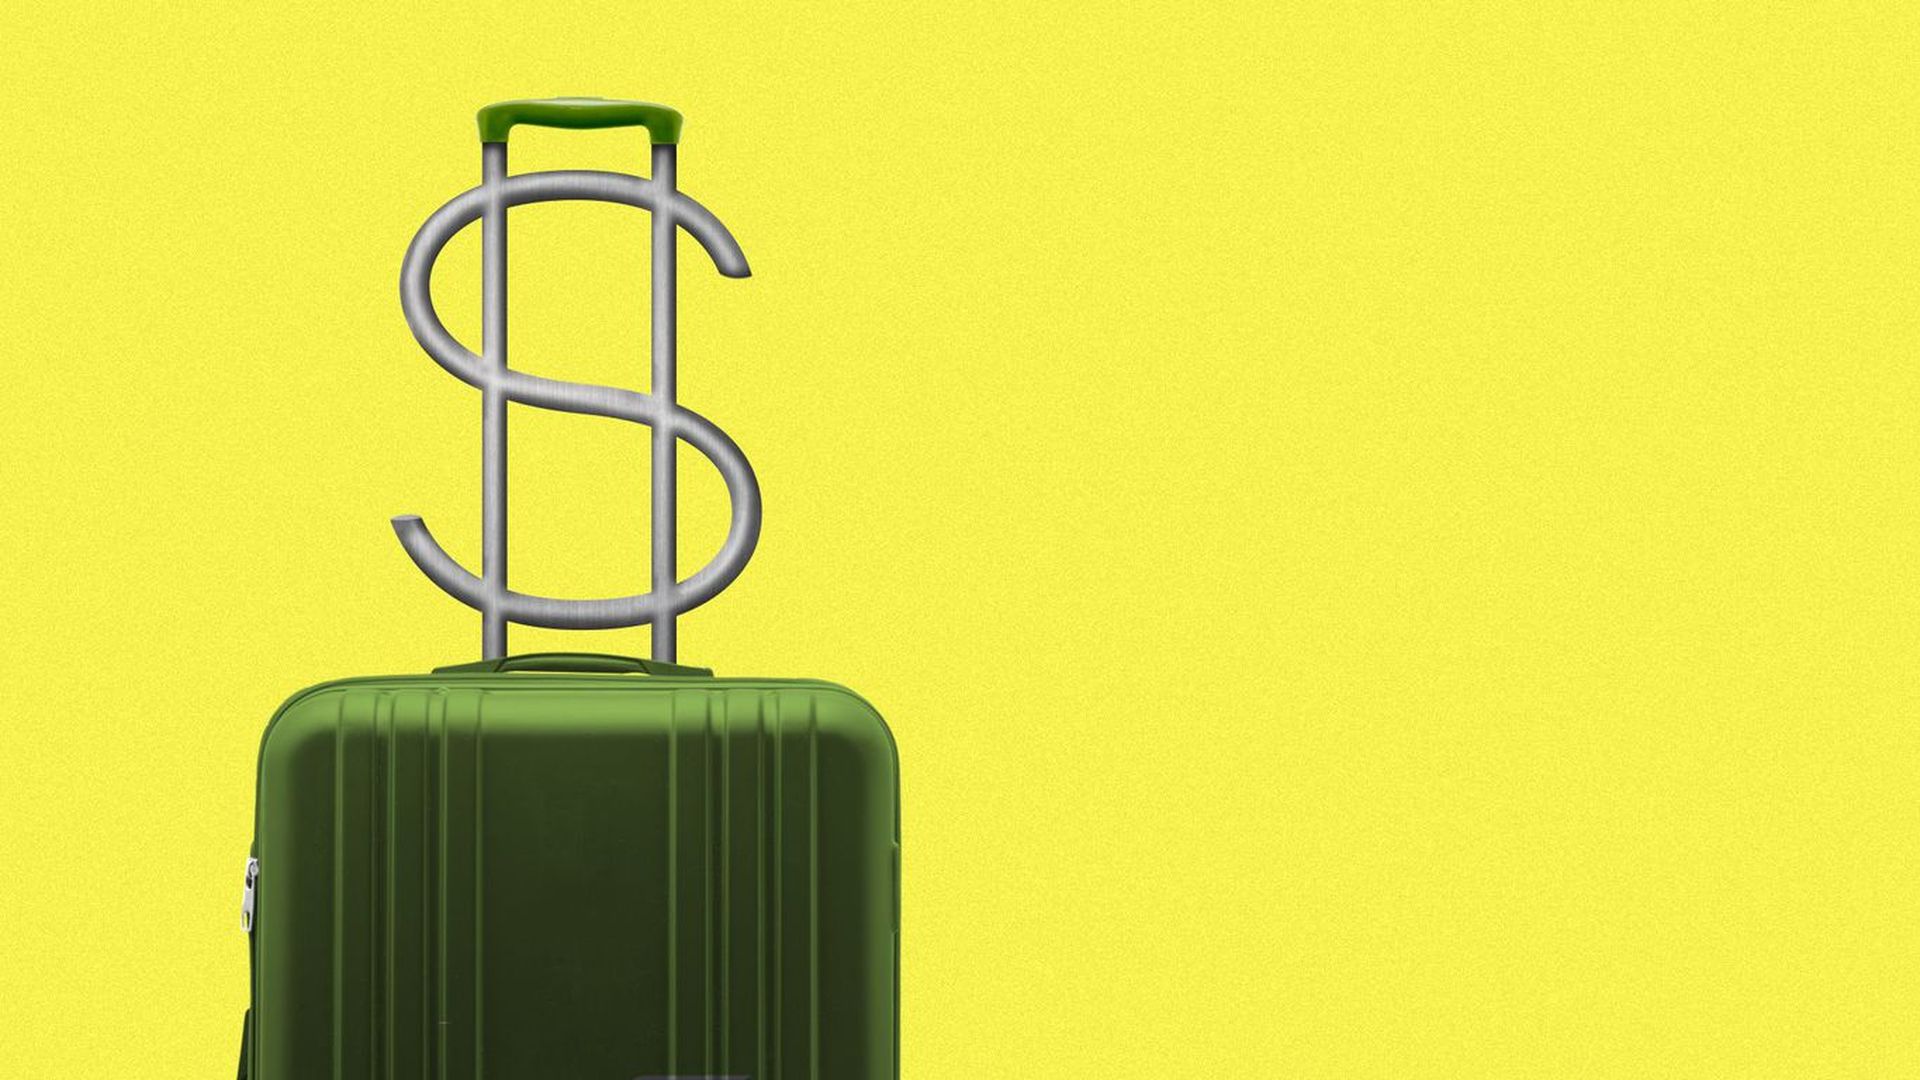 A suitcase with a money-sign handle